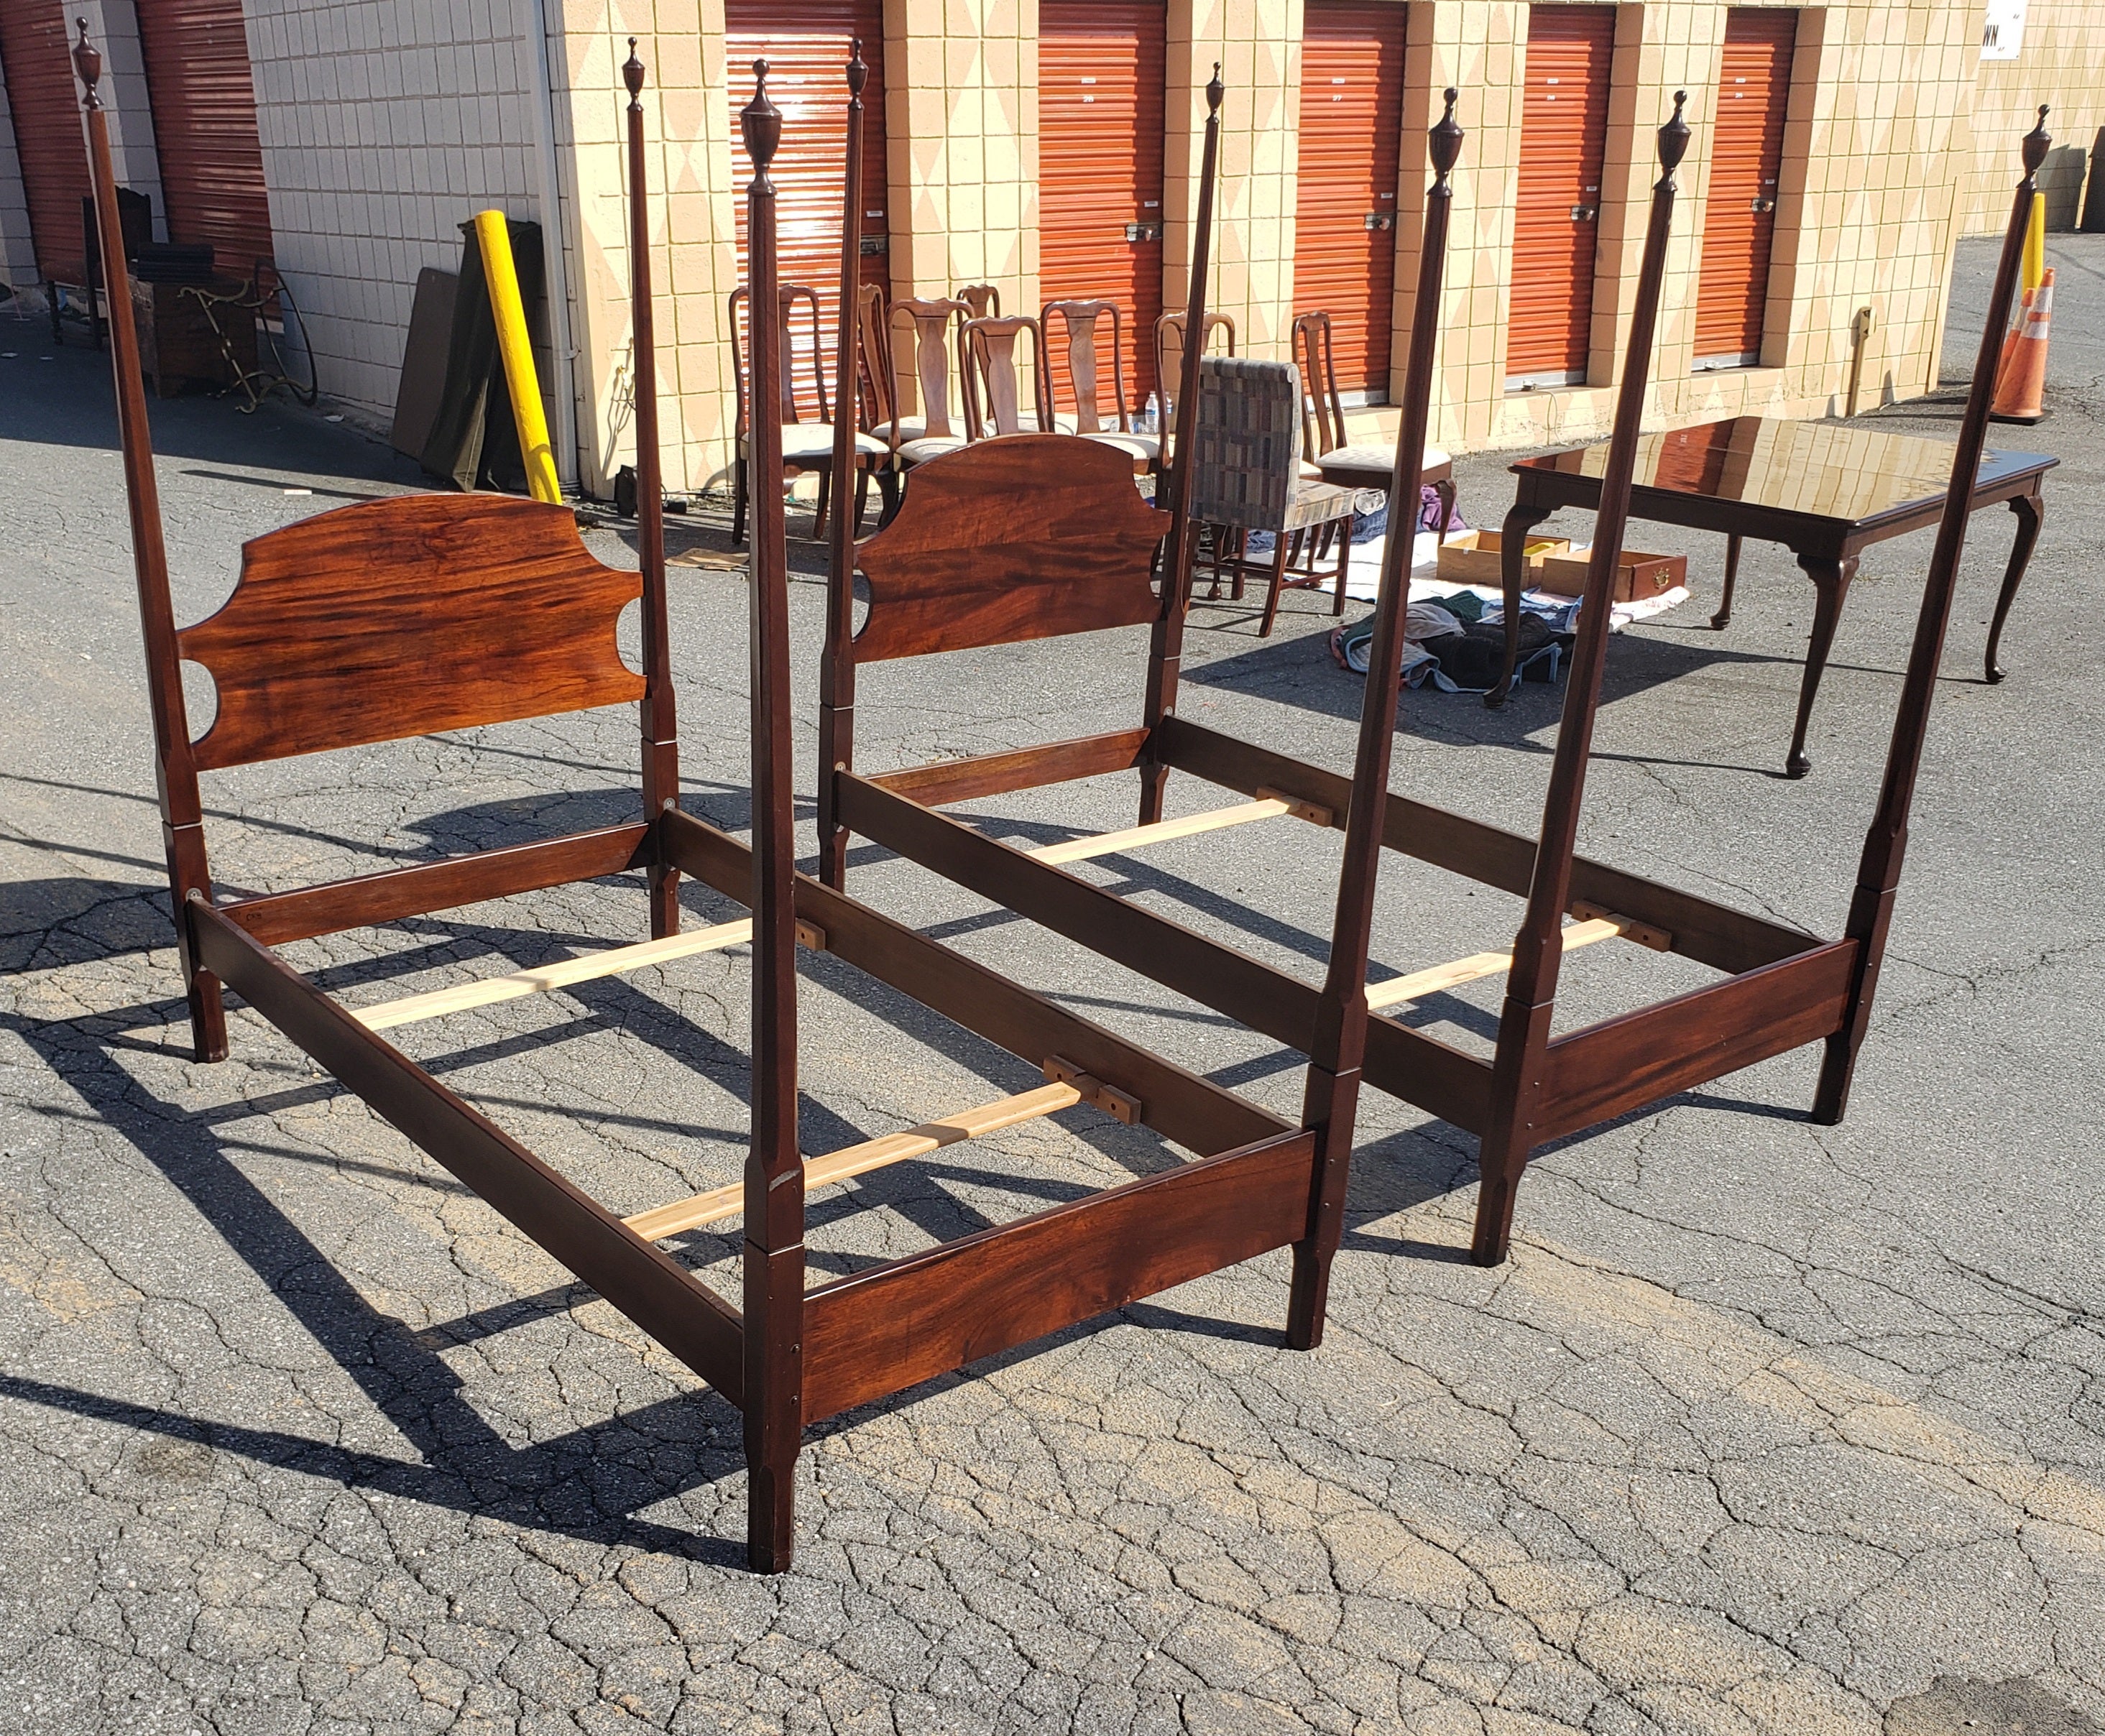 A pair of Stickley mahogany twin posters bedroom frames in excellent condition.
Amazingly well kept. Measures 80.5 inches long by 42 inches wide. Headboard is 41 inches high and footboard is 15.25 inches high. Inside measurements are 39.25 wide x